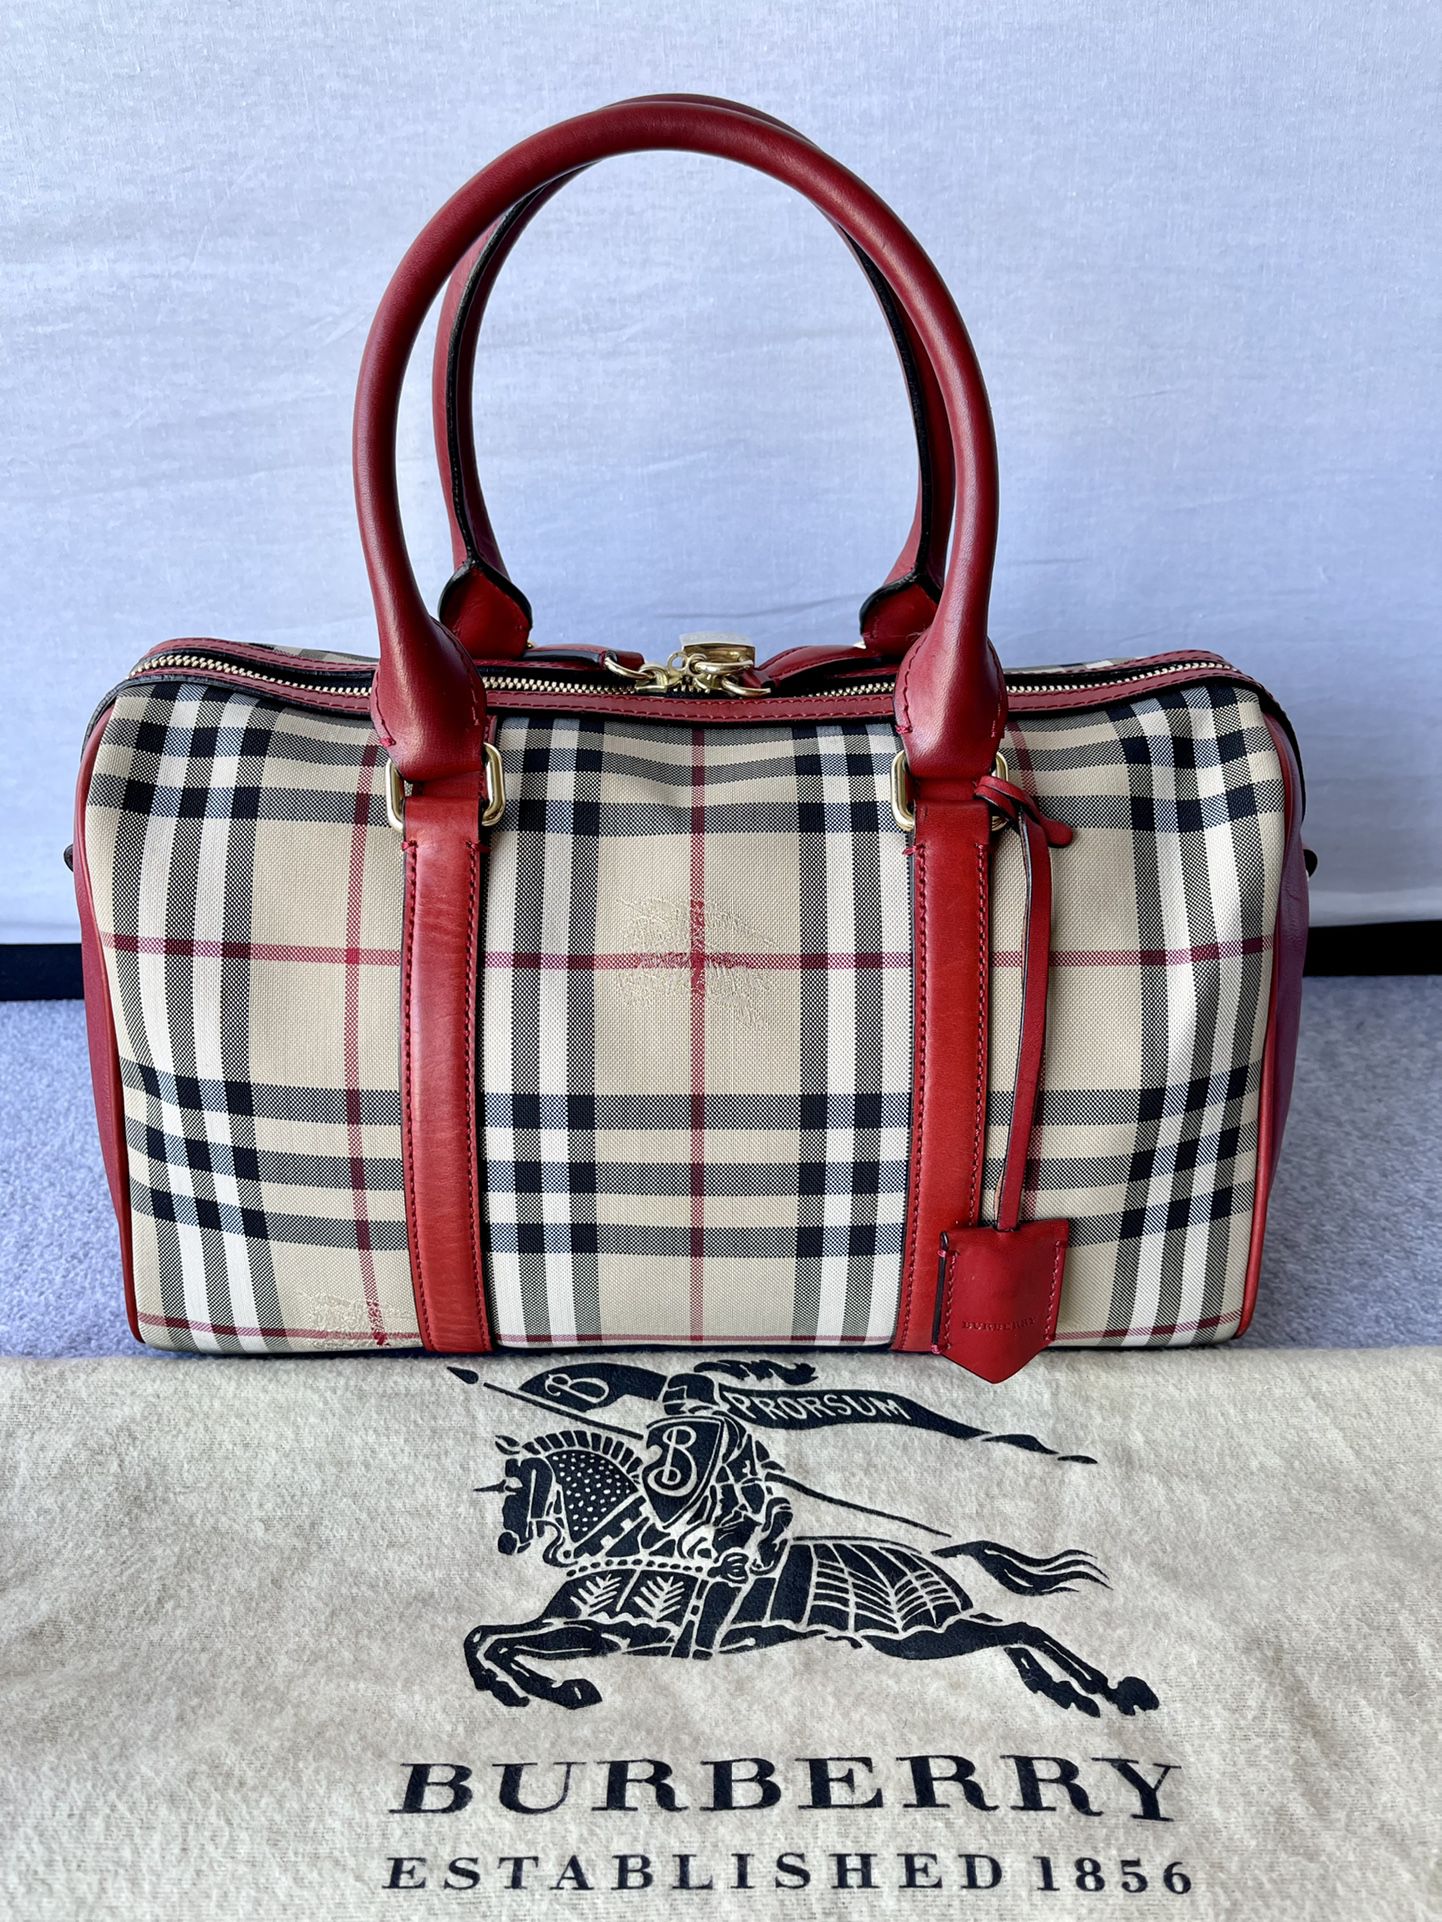 Burberry Check Bag with Red Leather